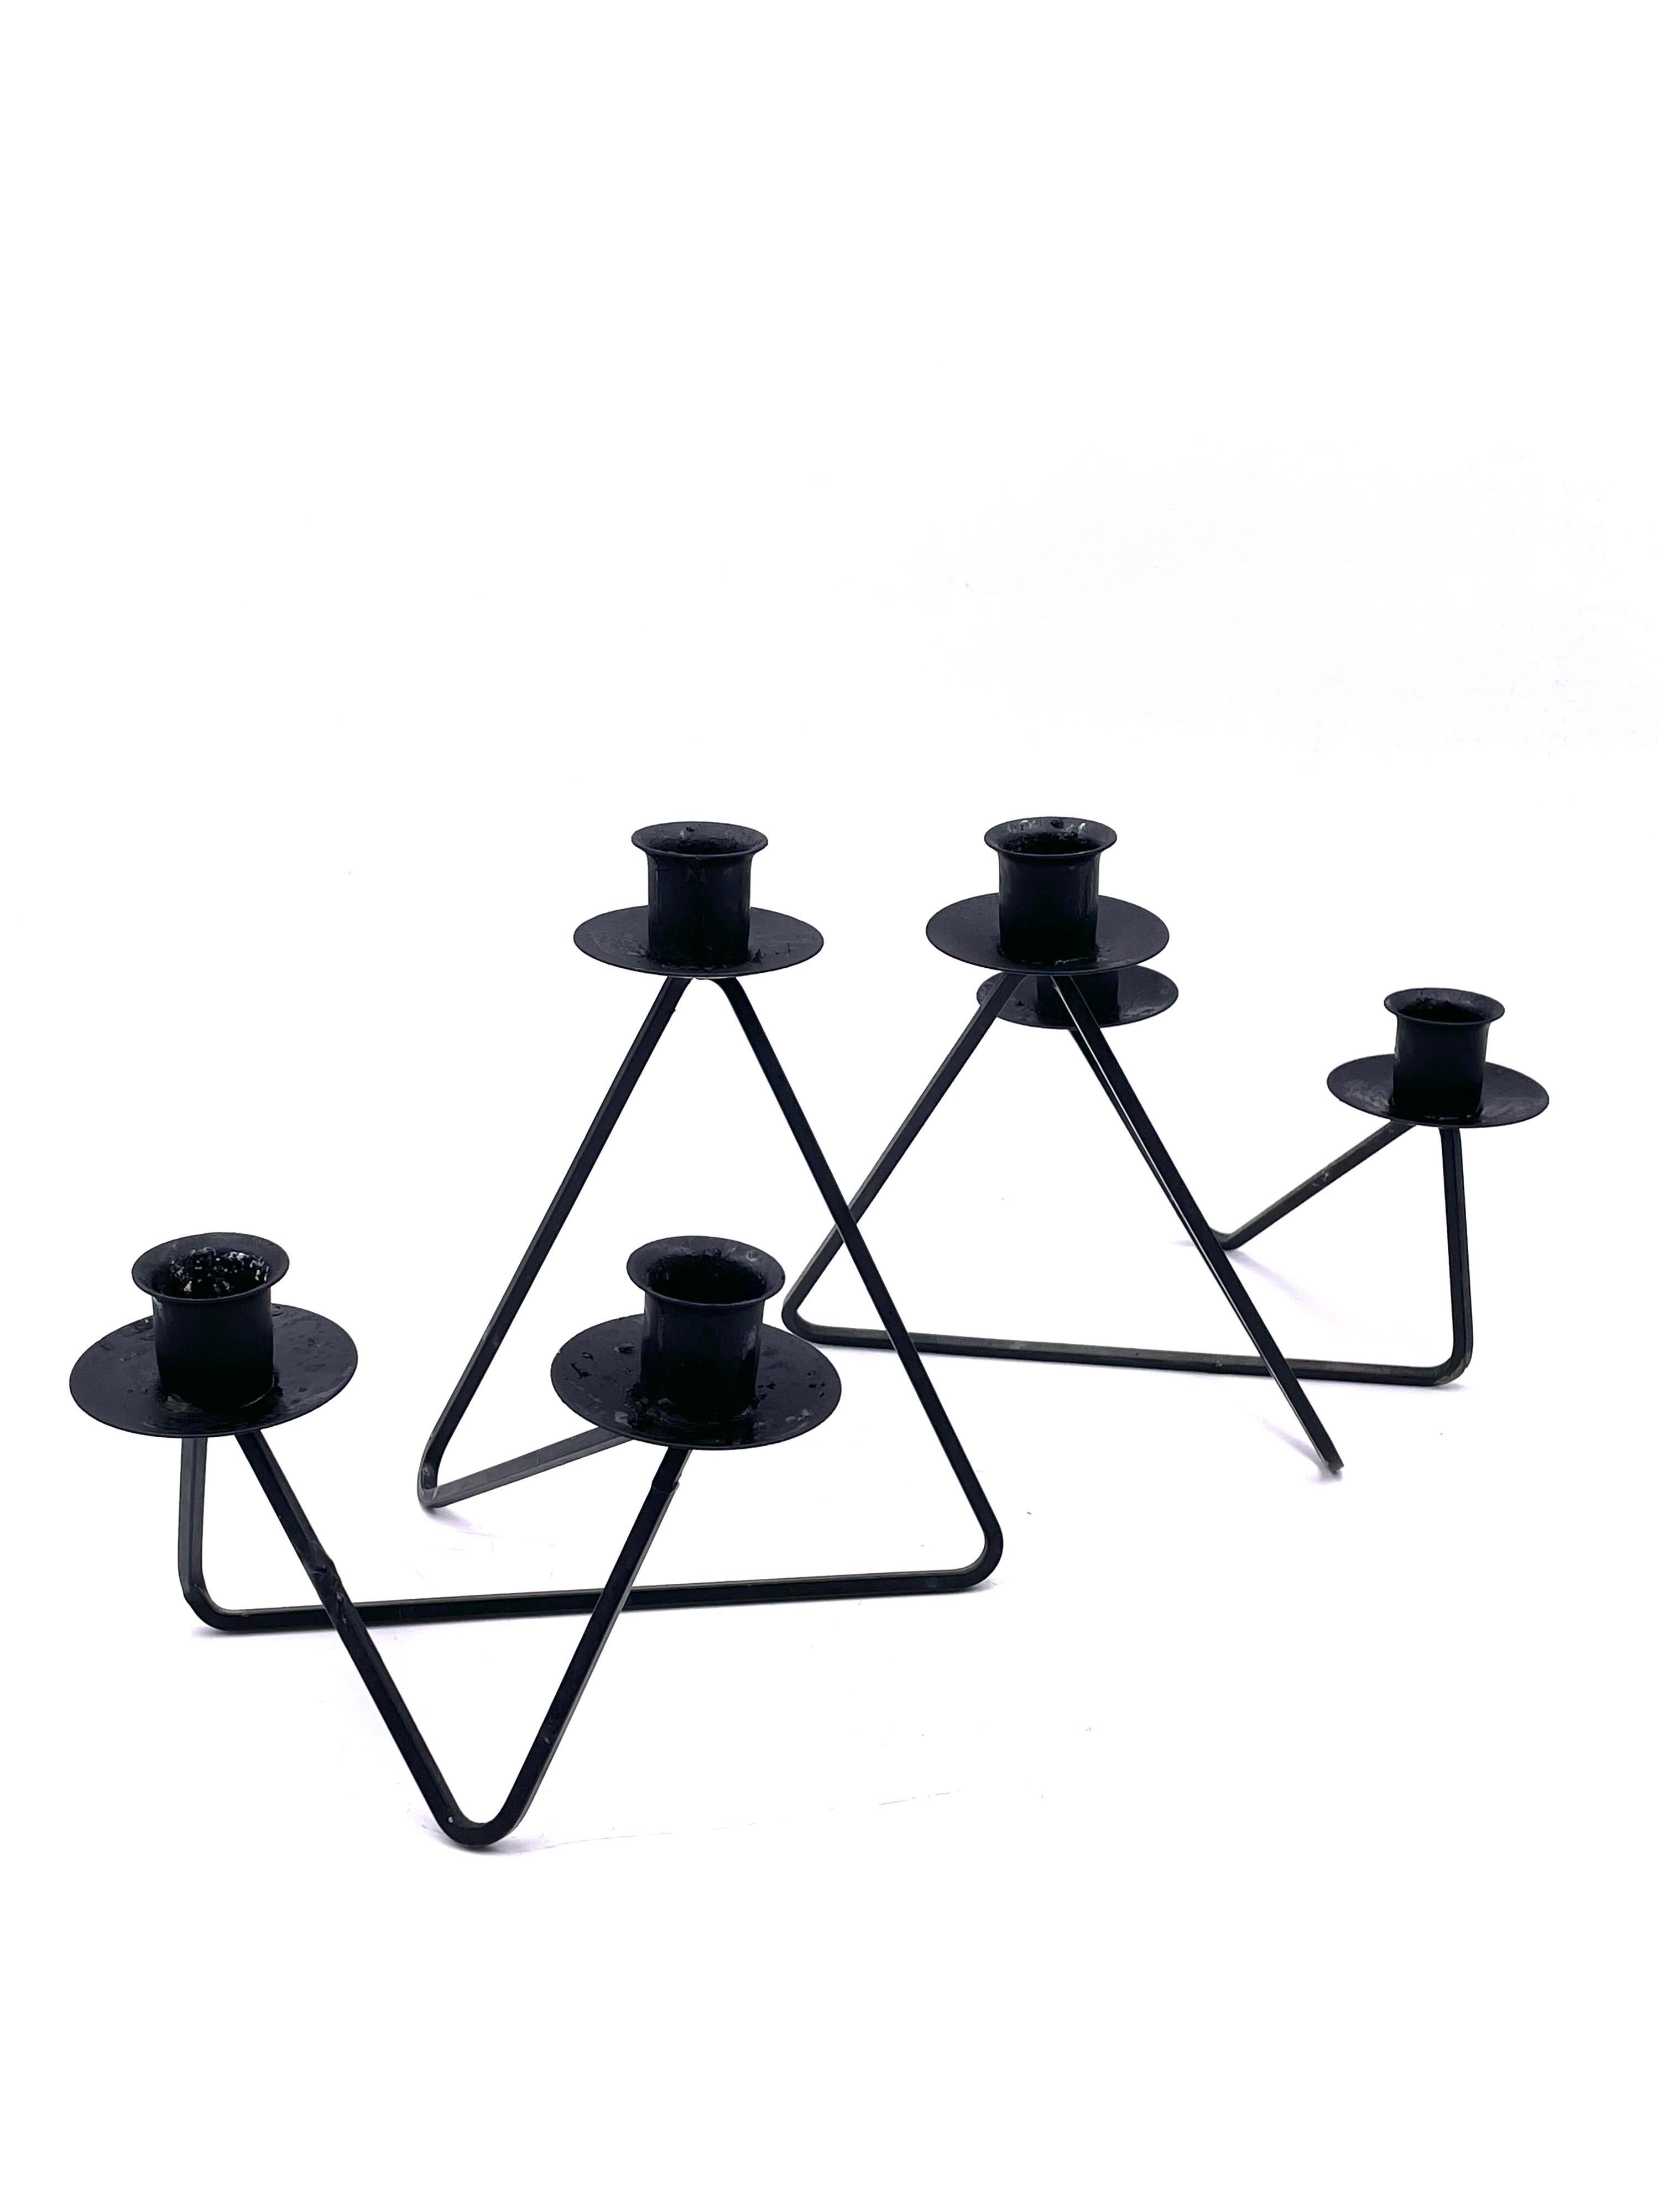 American Mid Century Modern Atomic Age Pair of Candleholders Set In Good Condition For Sale In San Diego, CA